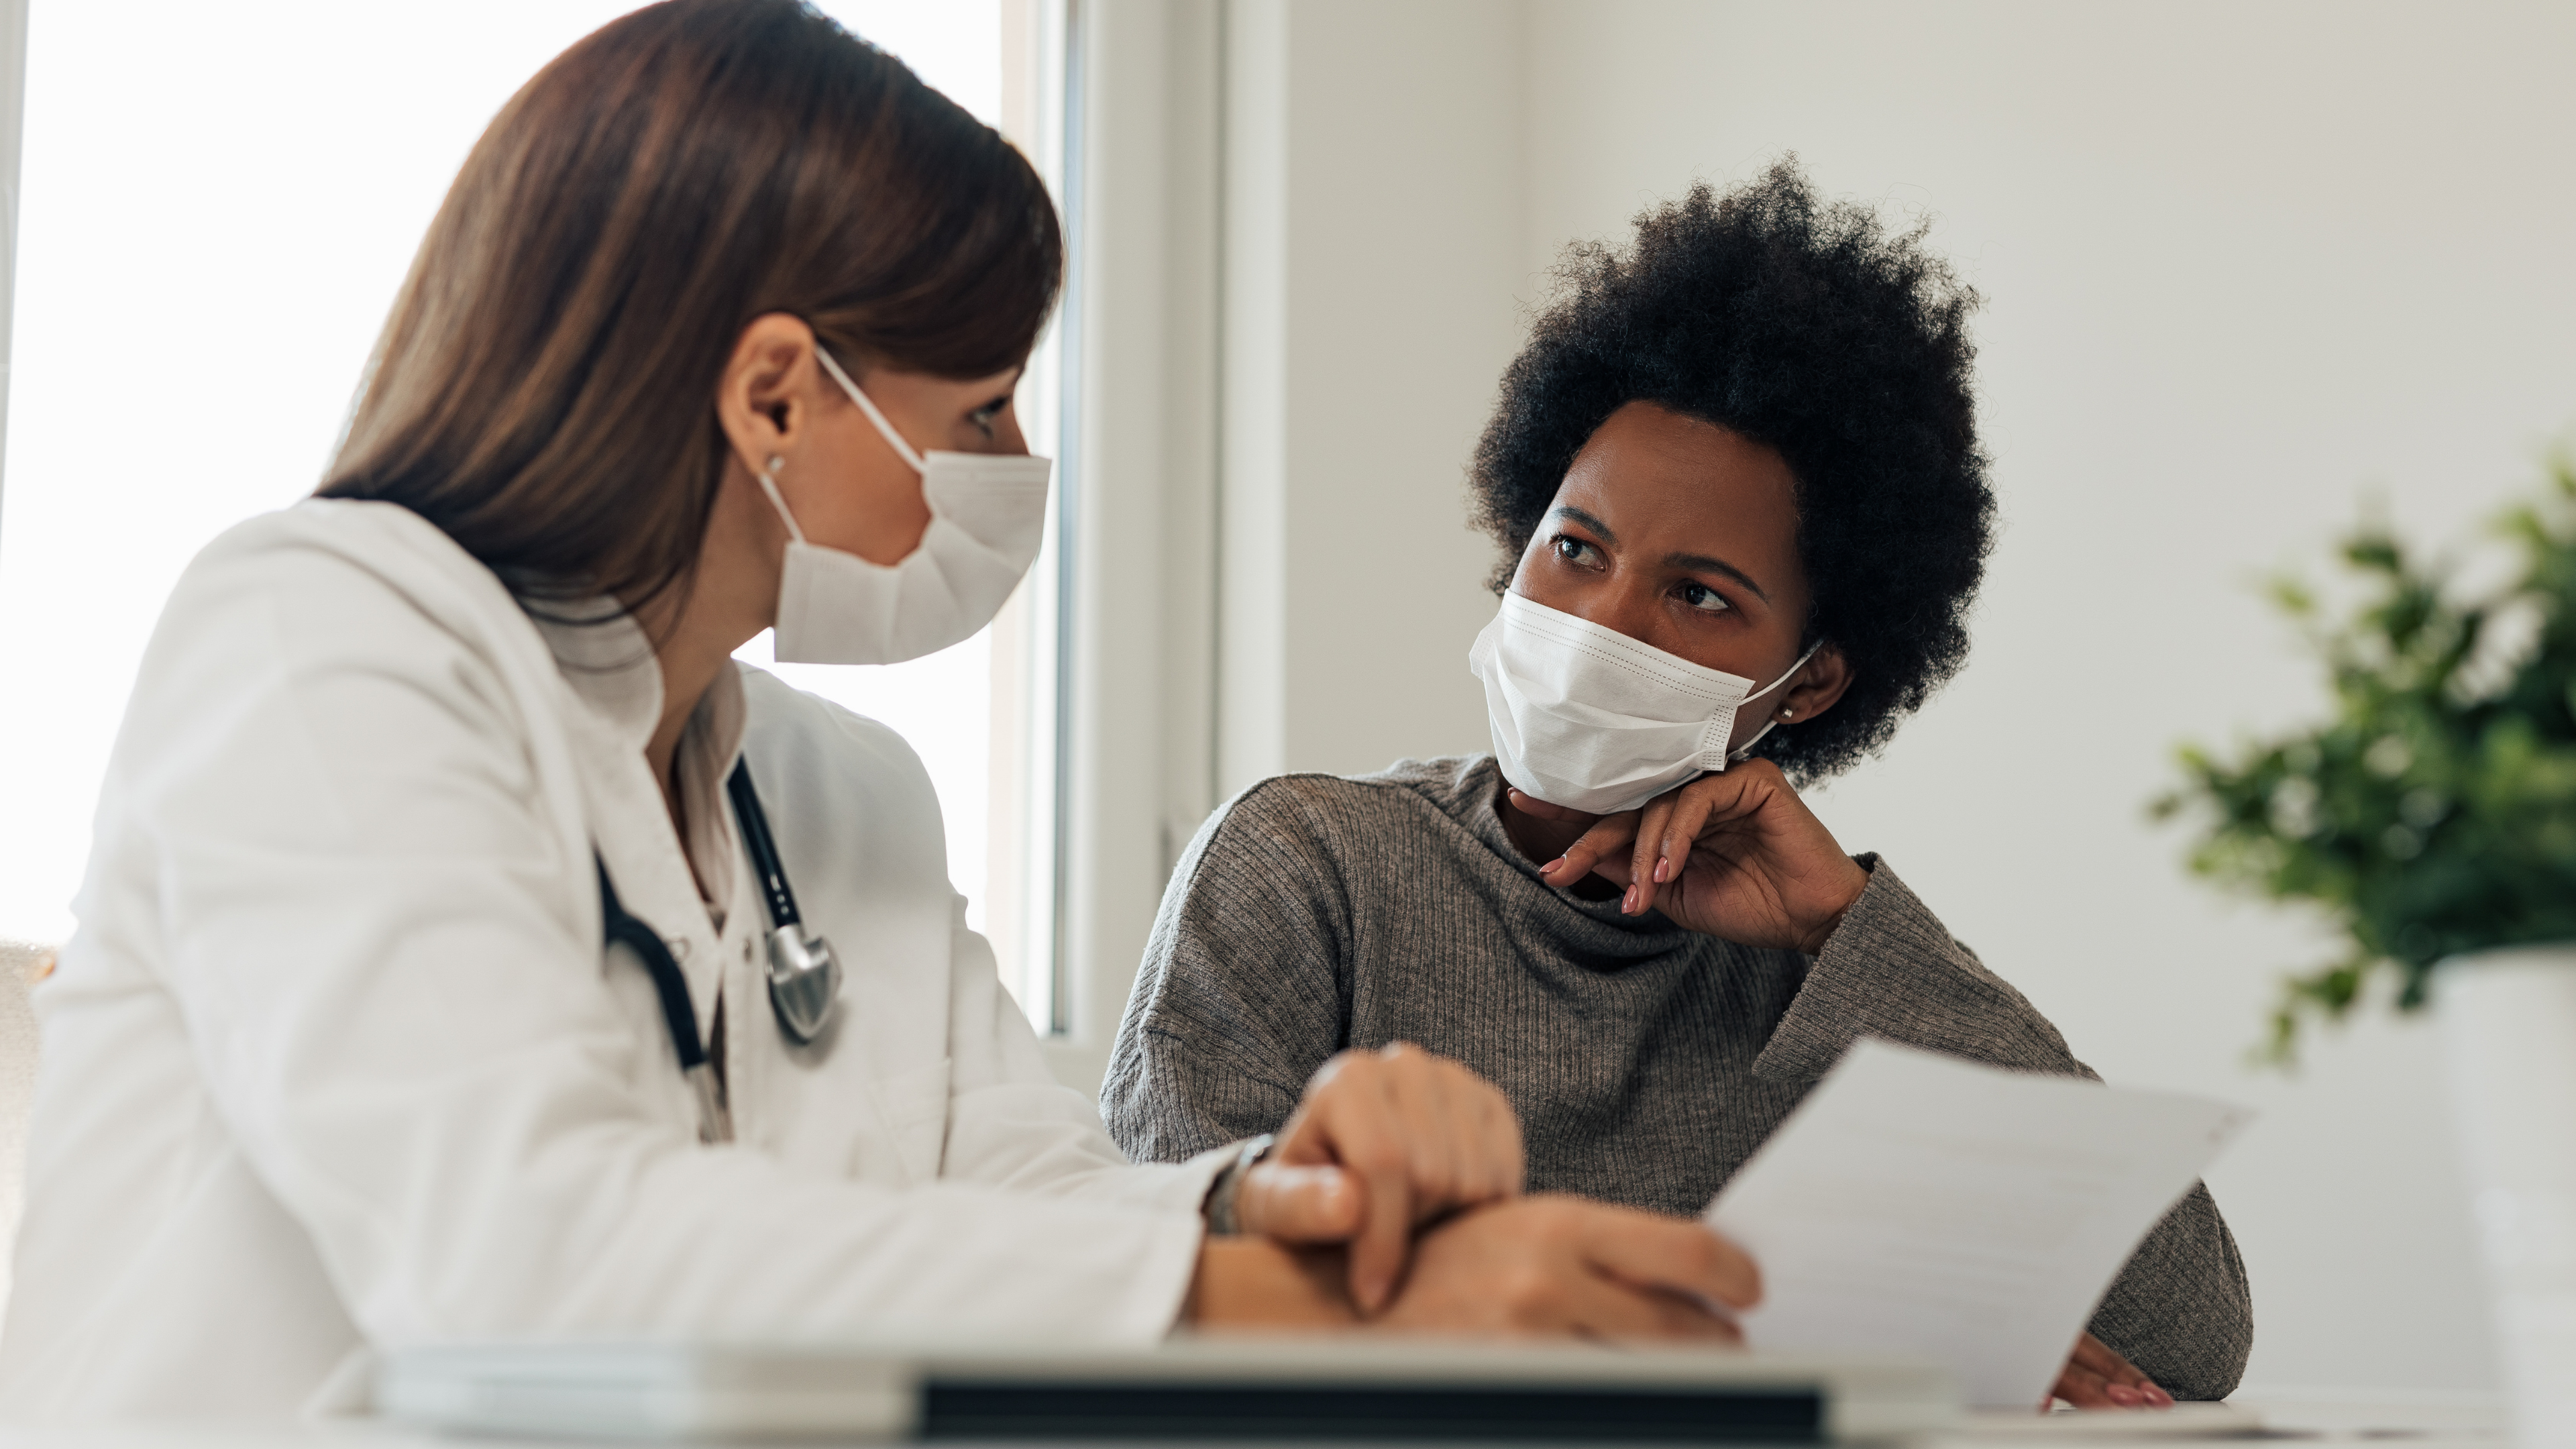 A white female doctor explaining a diagnosis or health information to an African American woman patient, both wearing masks